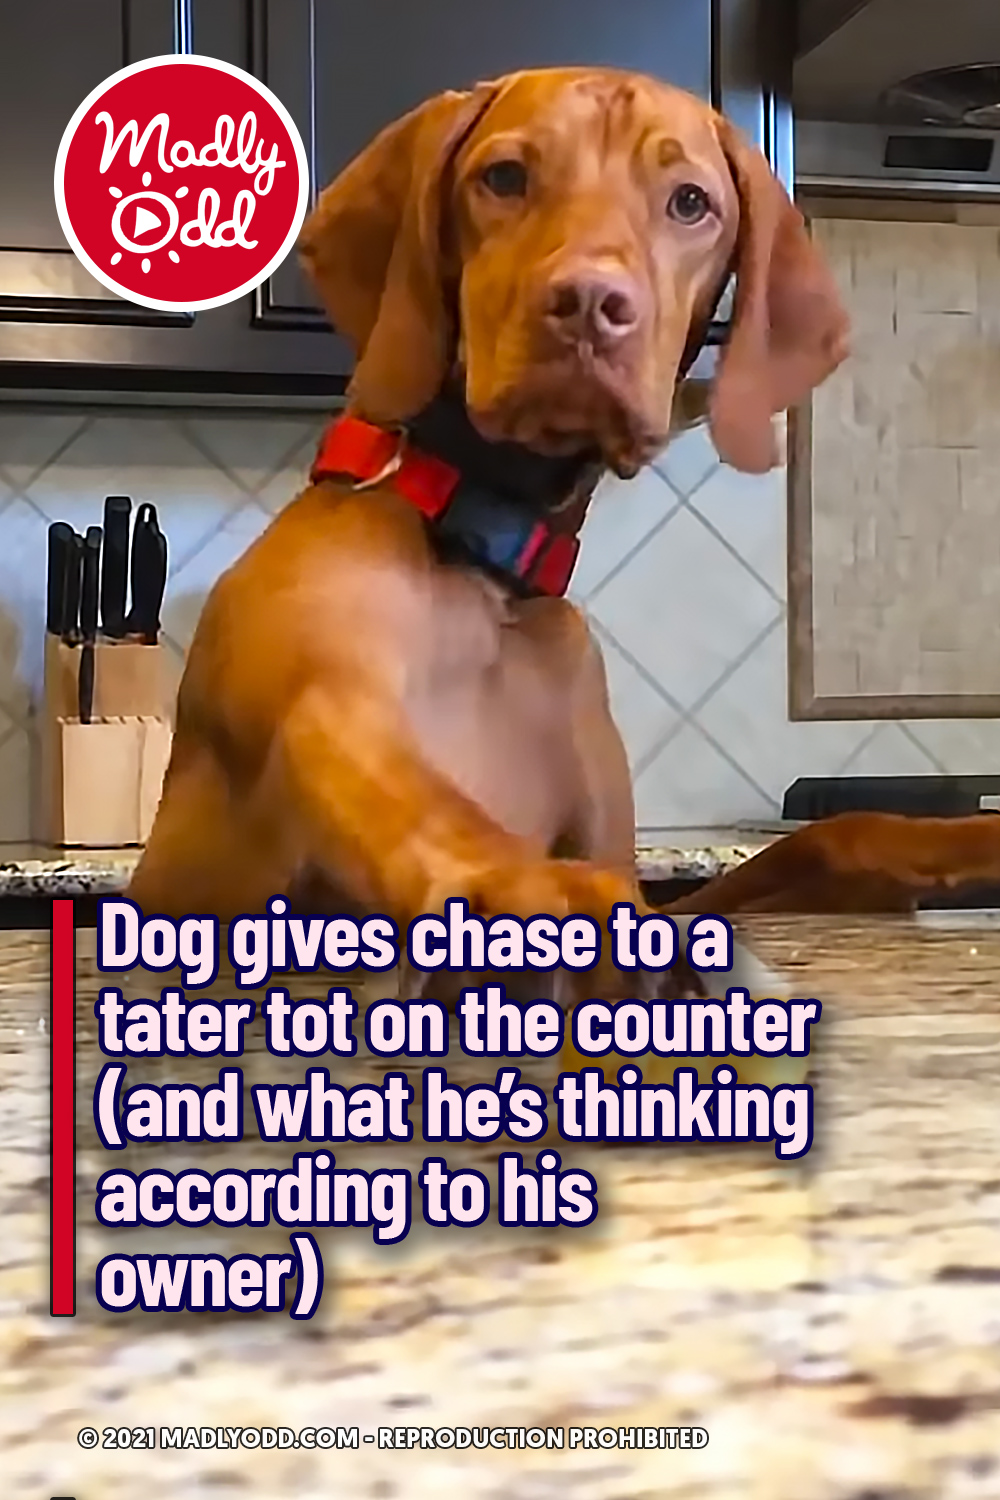 Dog gives chase to a tater tot on the counter (and what he’s thinking according to his owner)